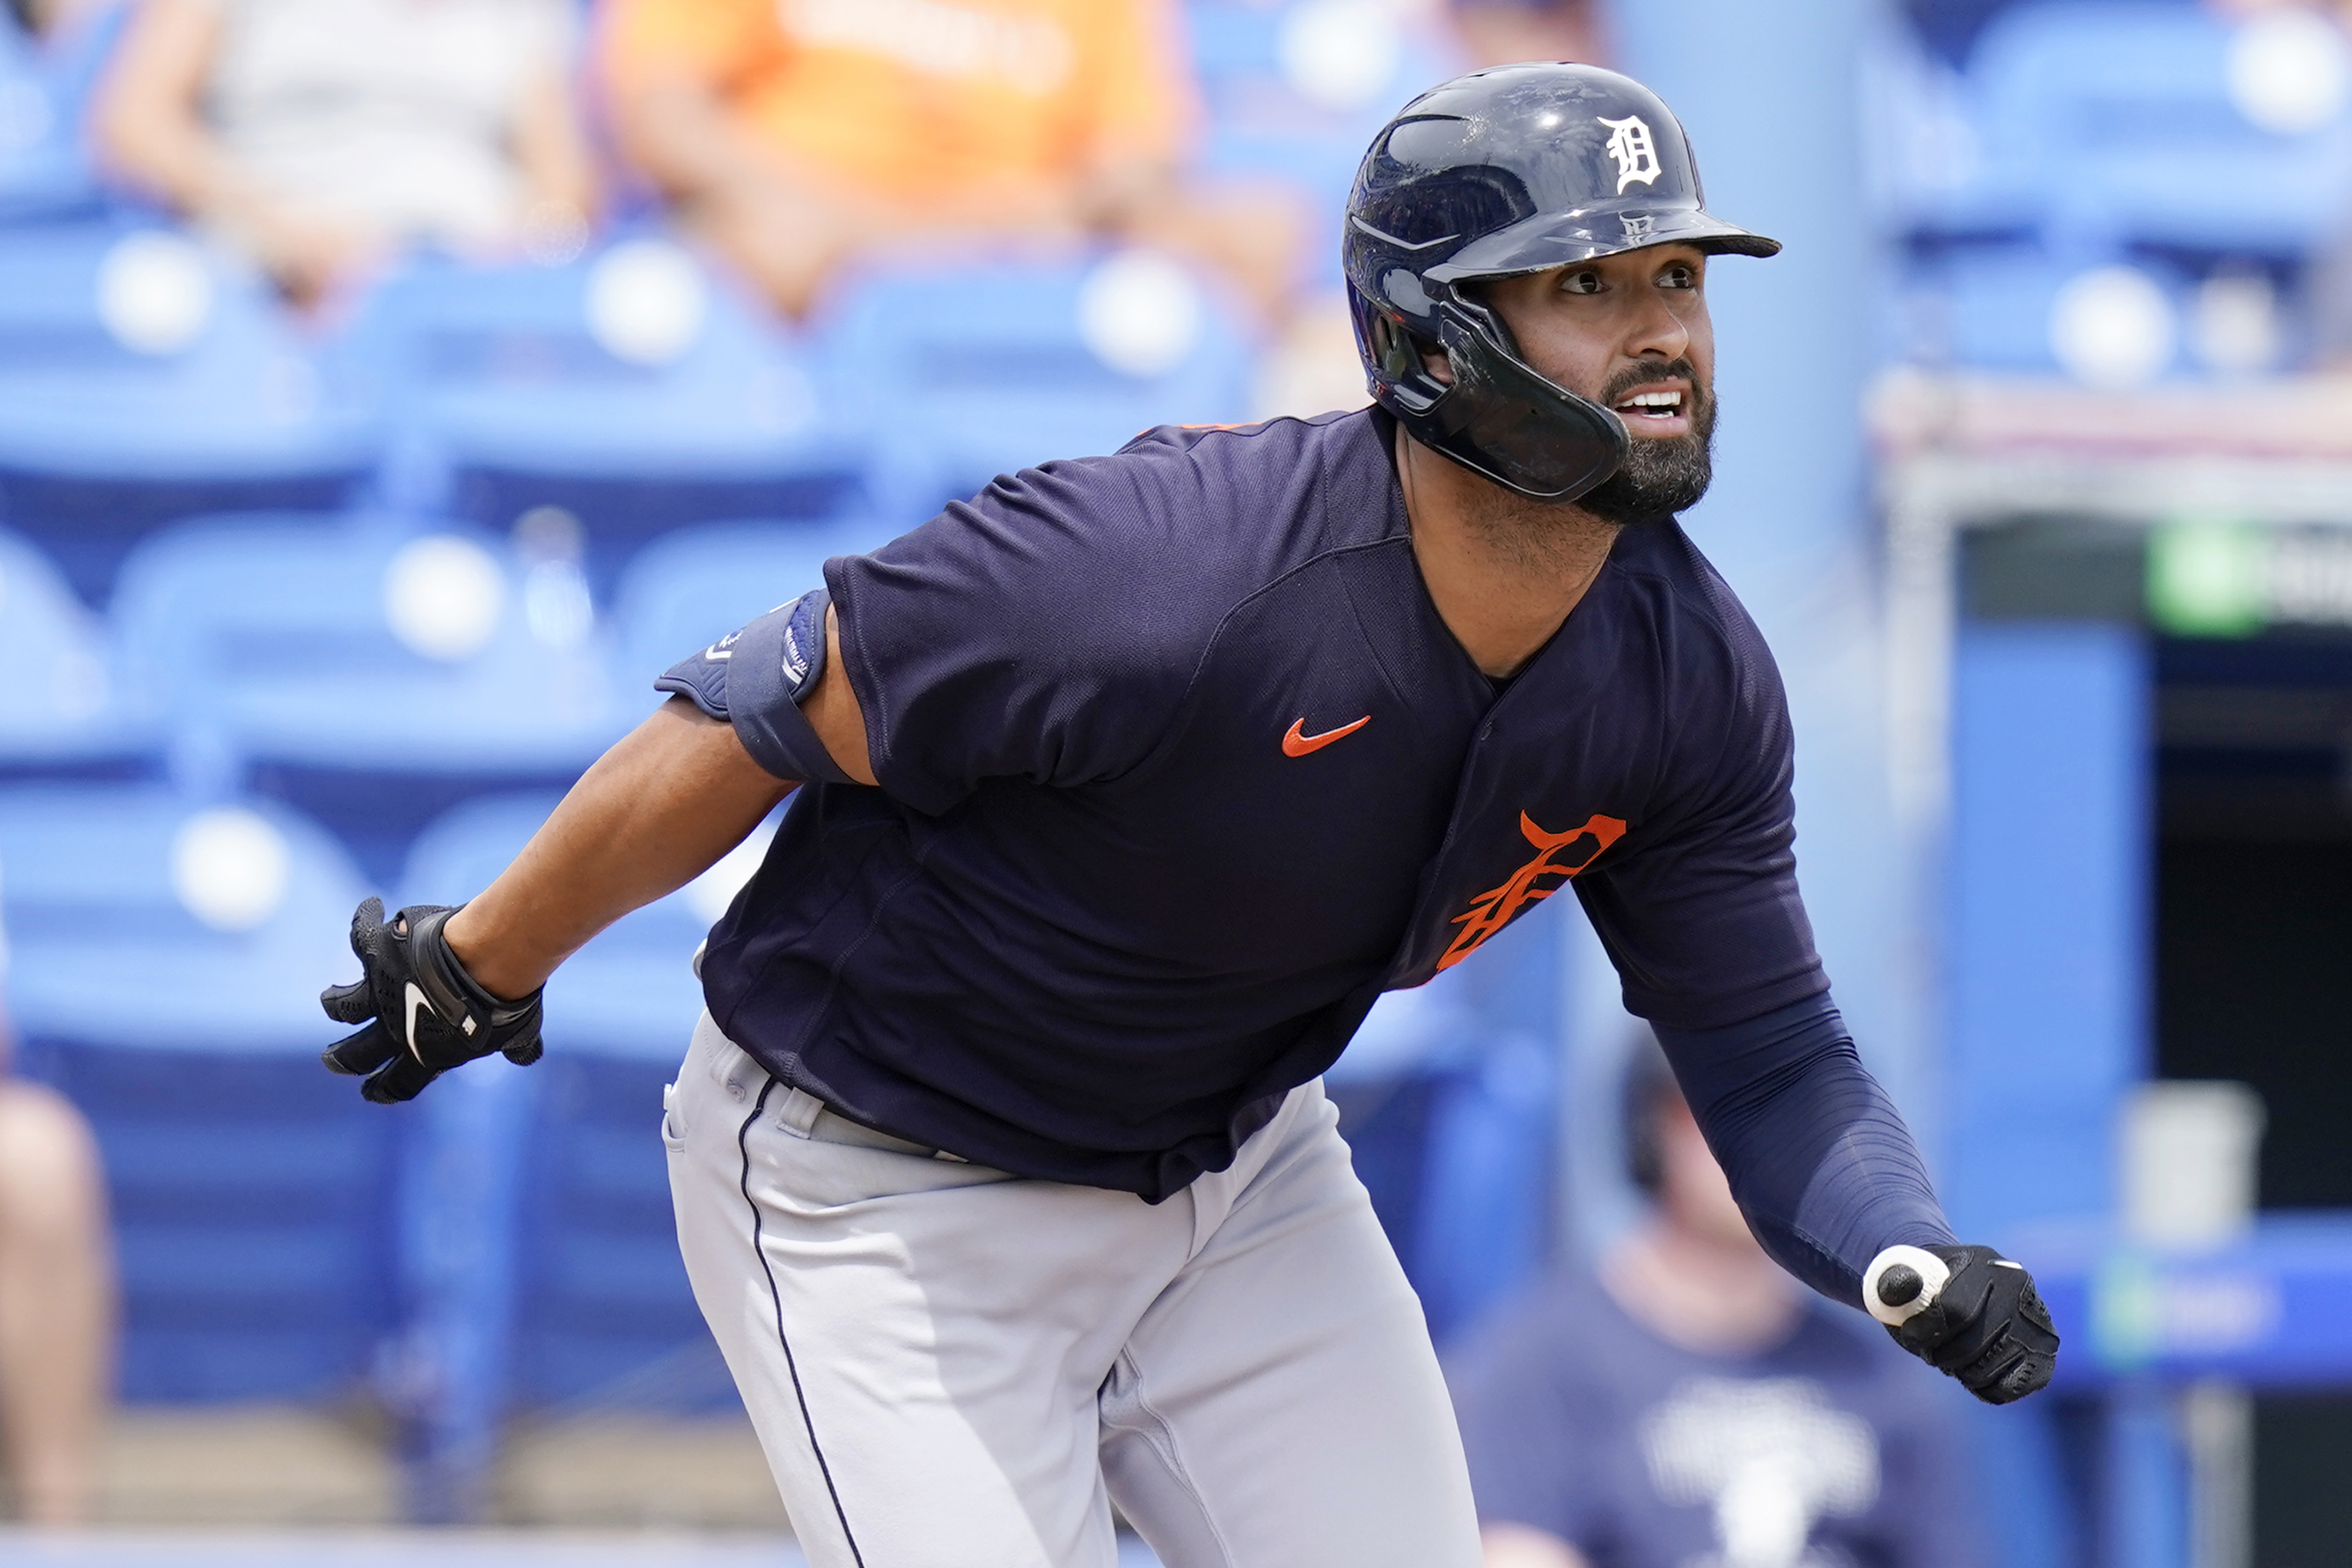 2023 MLB Fantasy: Tigers OF Riley Greene is Off to a Hot Start This Spring  - New Baseball Media